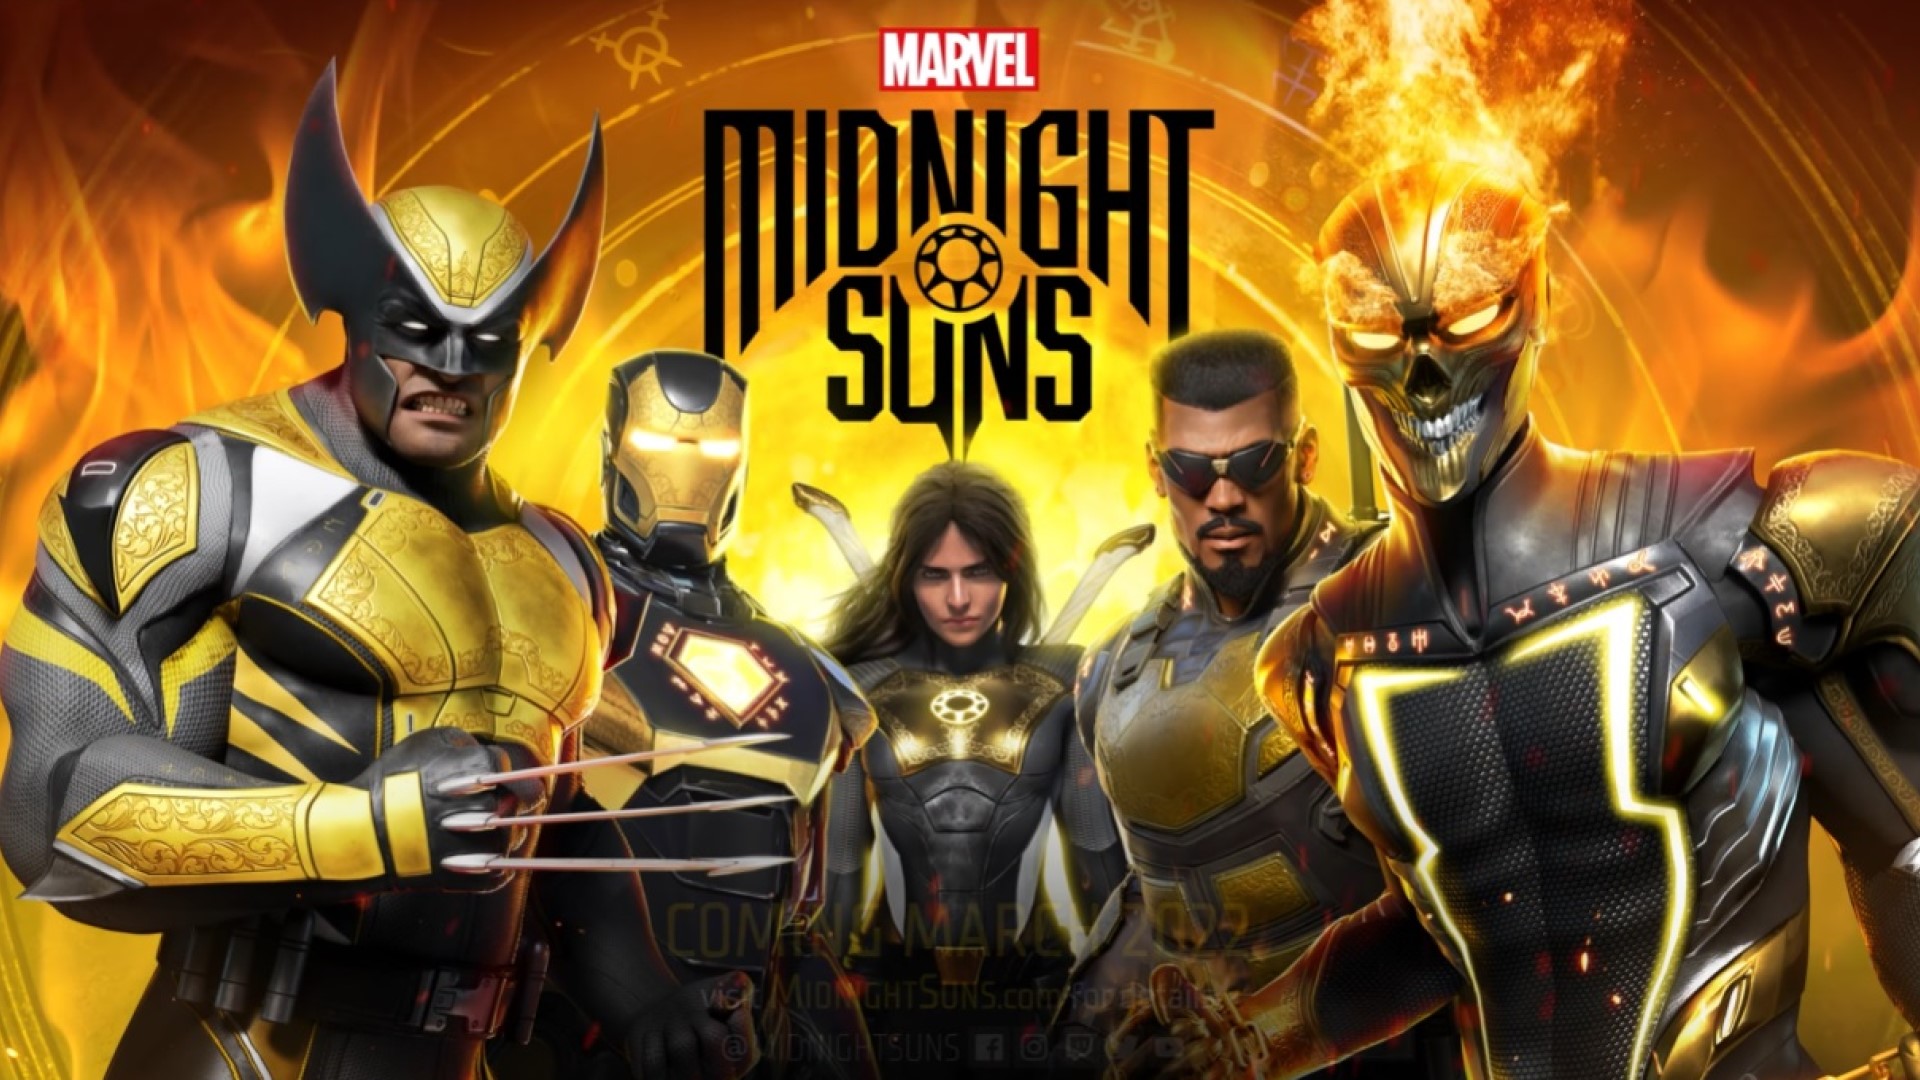 Marvel's Midnight Suns Switch version scrapped - Video Games on